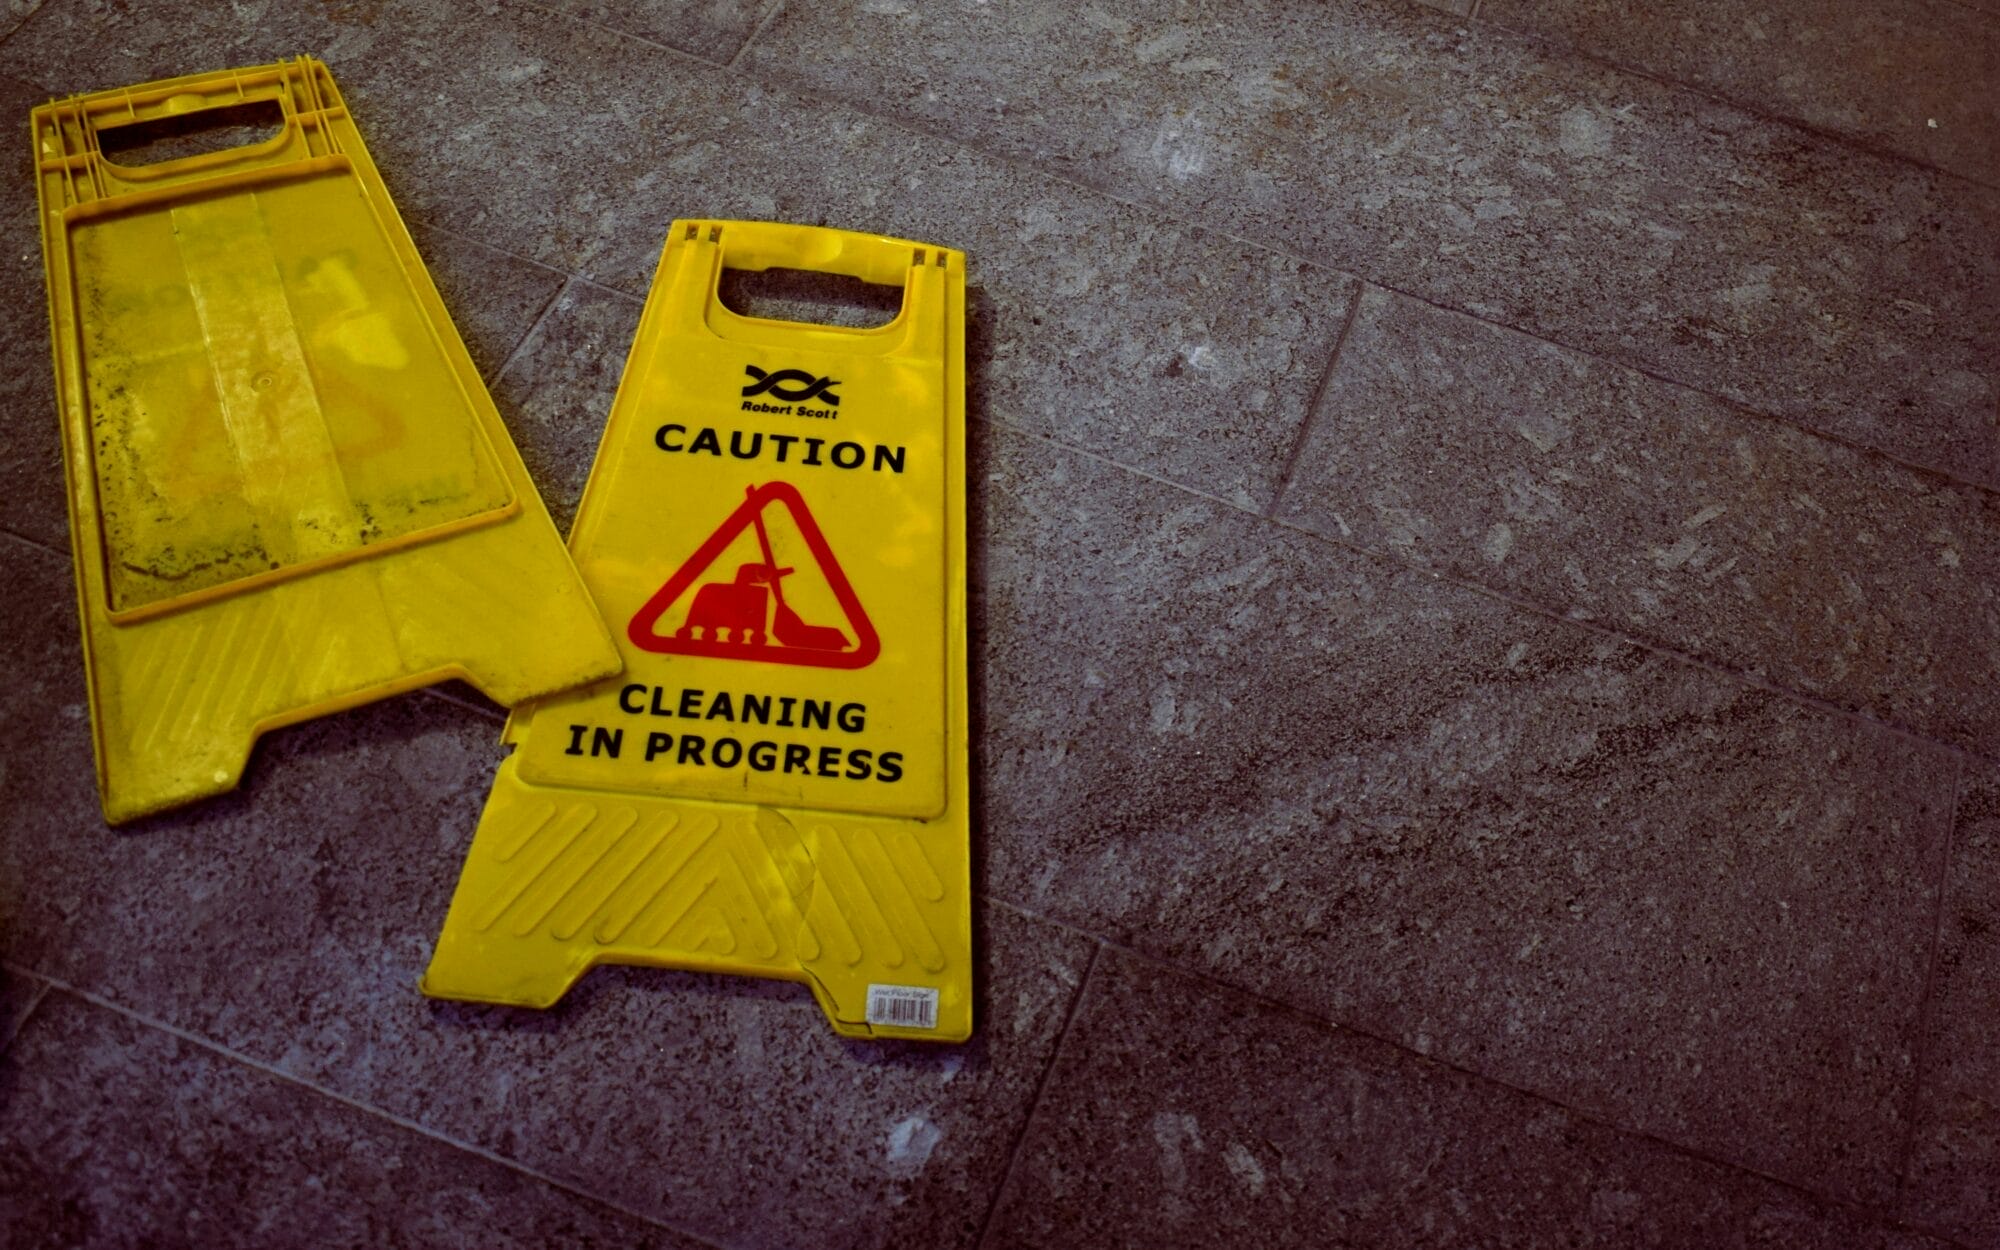 2 Caution cleaning in progress signs laying on the floor